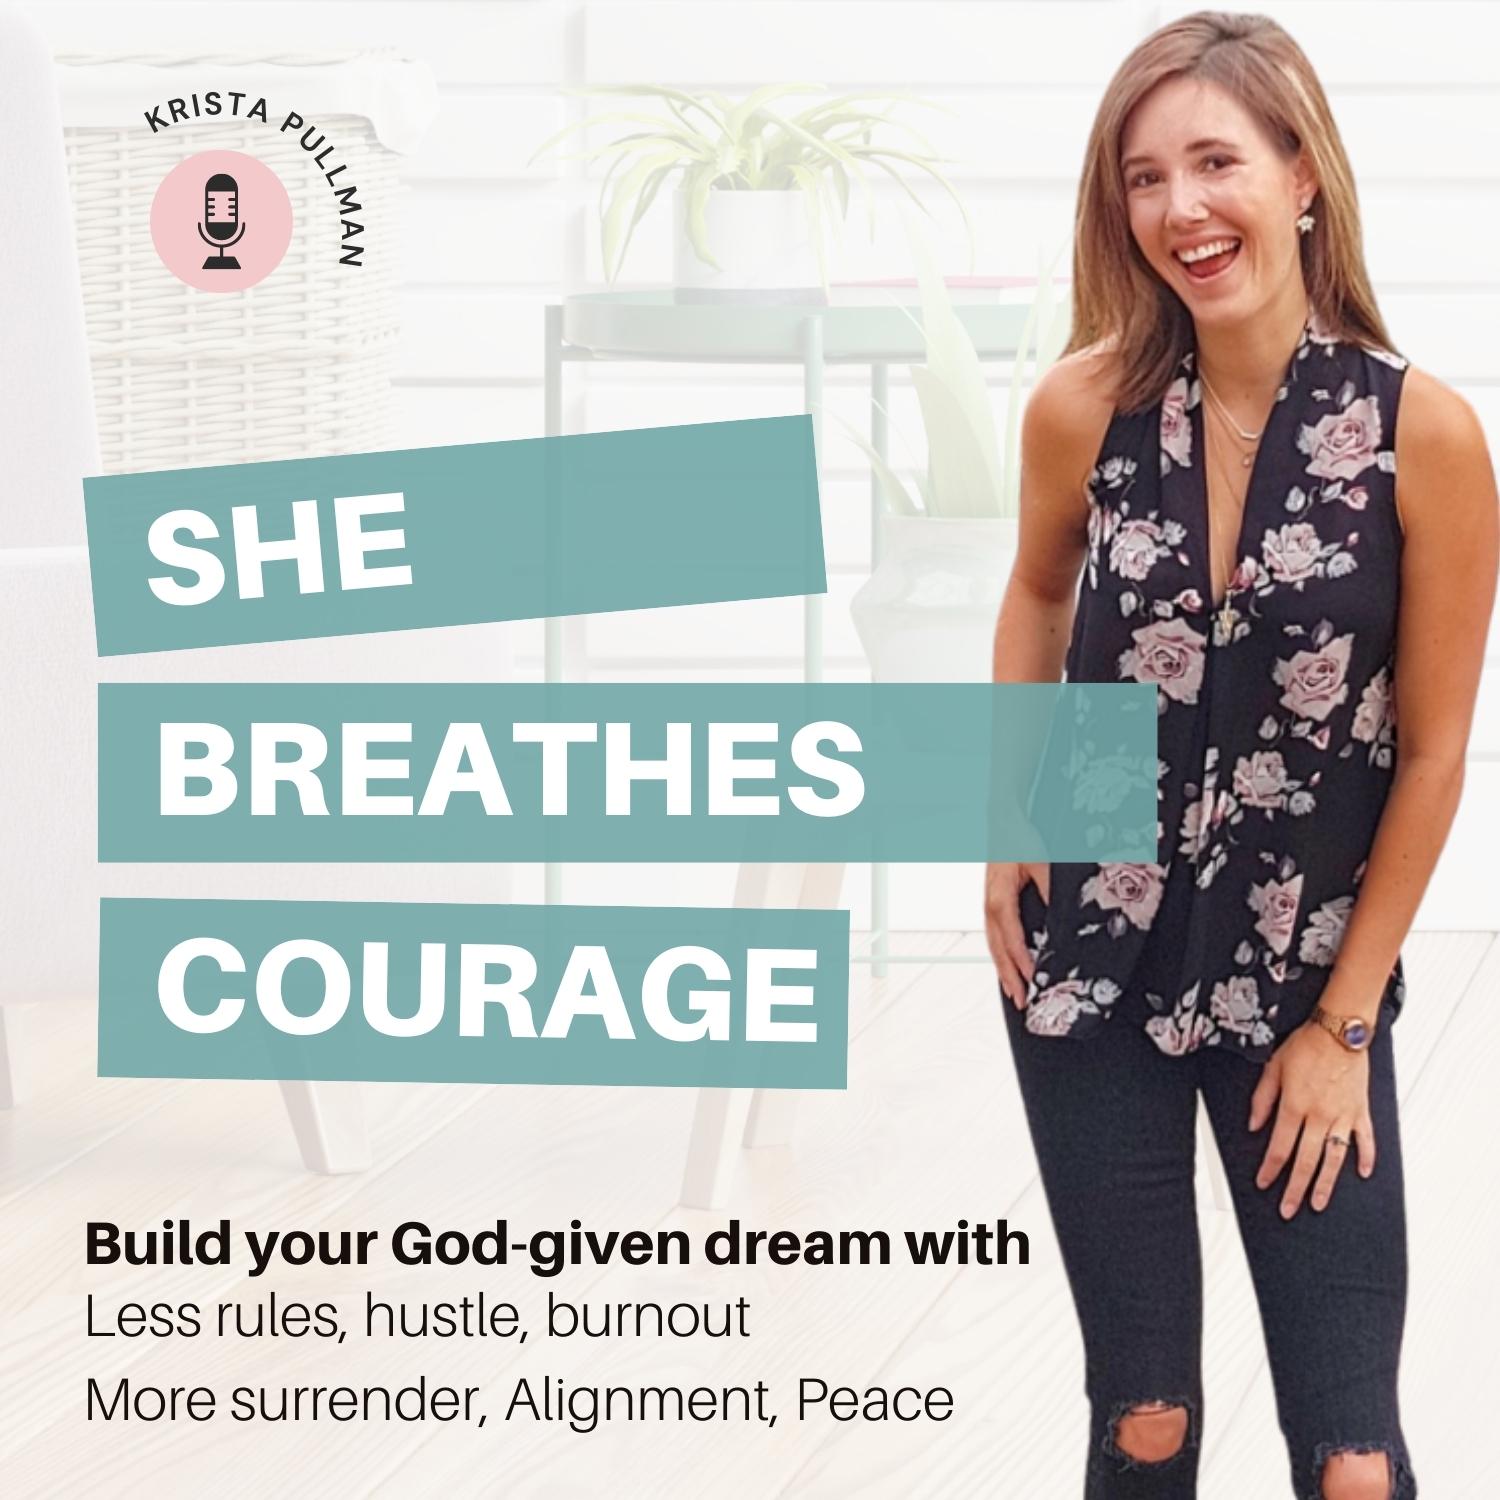 SHE BREATHES COURAGE